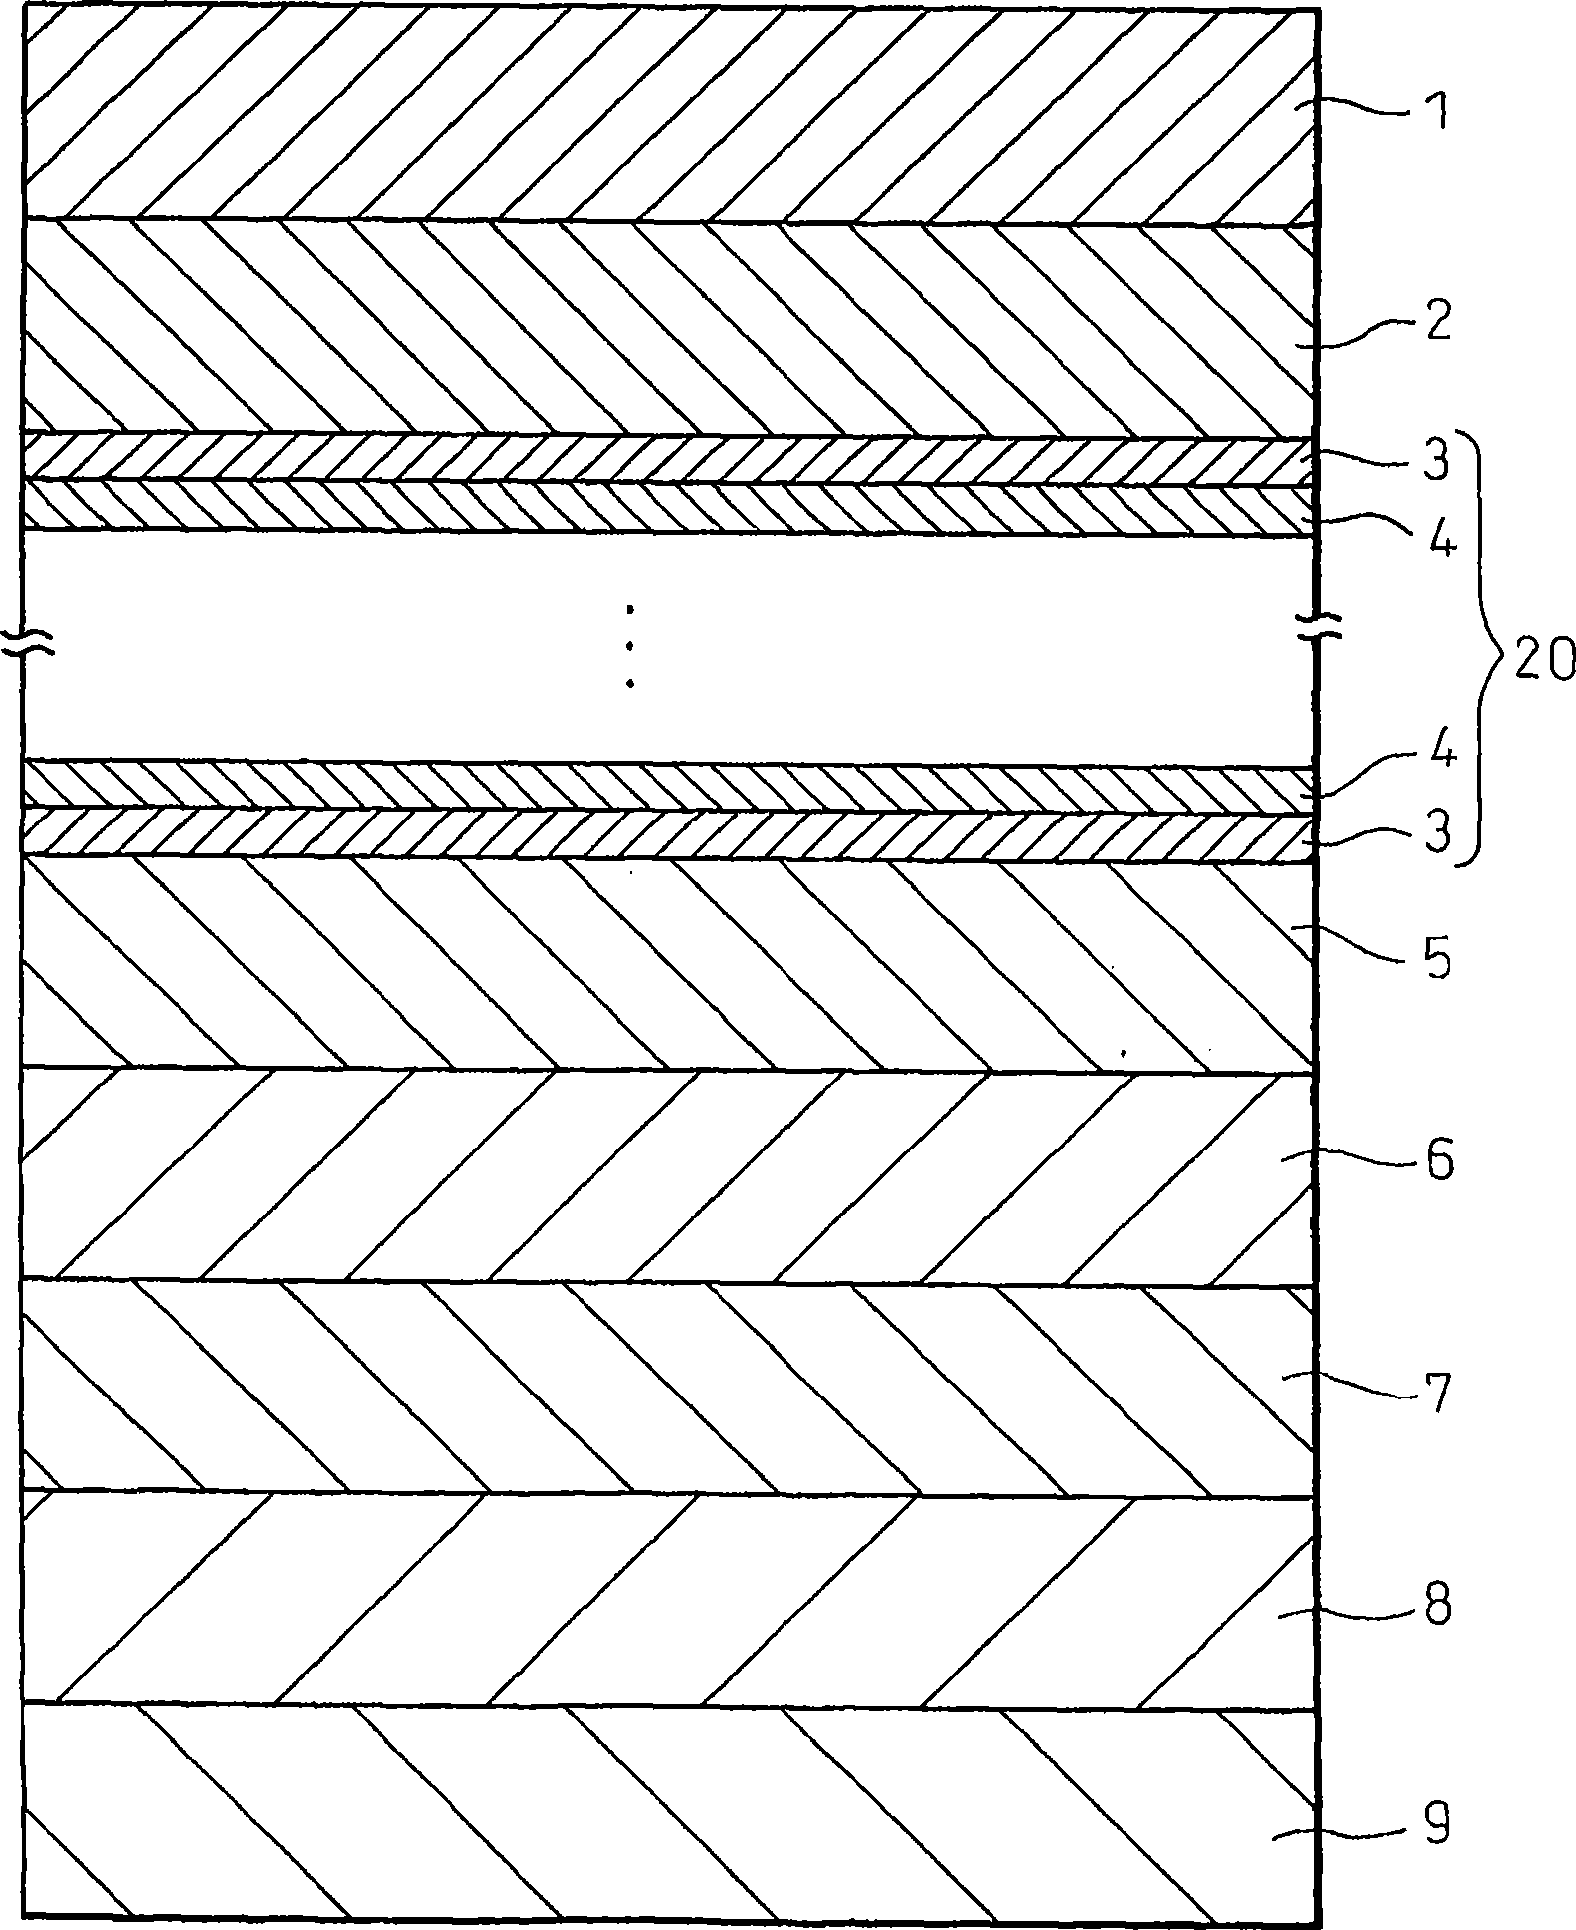 III nitride compound semiconductor laminated structure